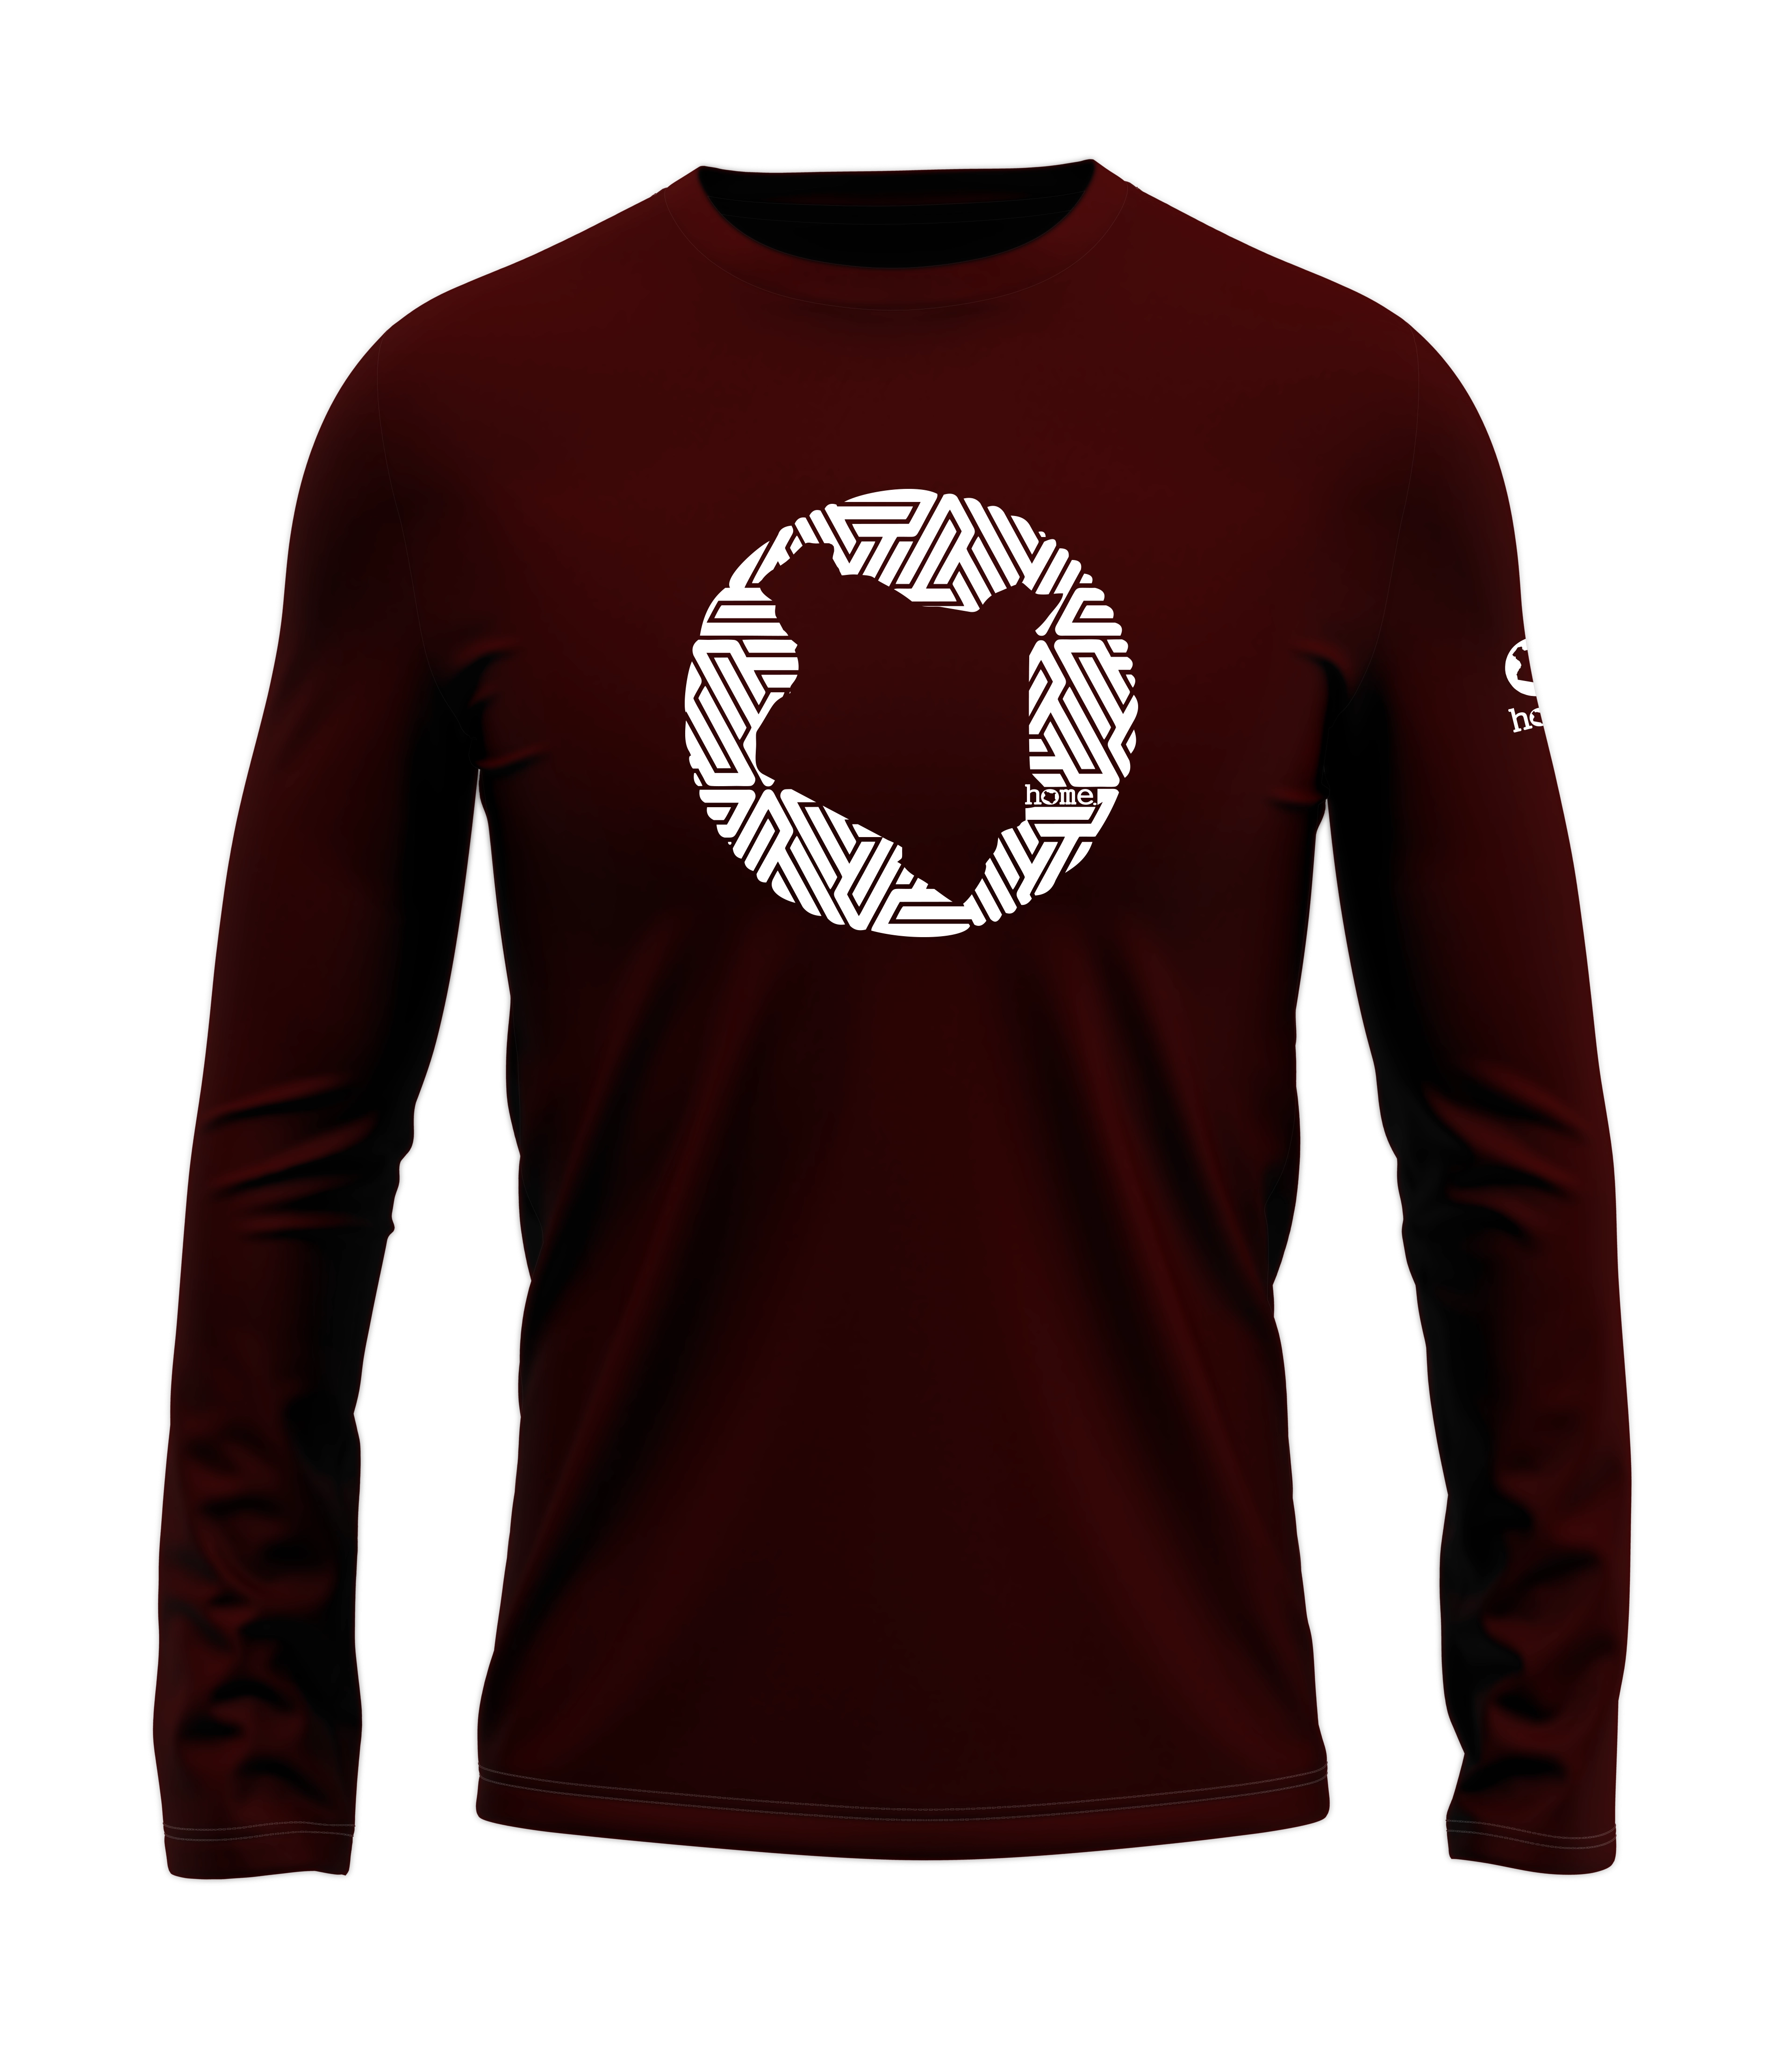 home_254 LONG-SLEEVED MAROON T-SHIRT WITH A WHITE MAP PRINT – COTTON PLUS FABRIC